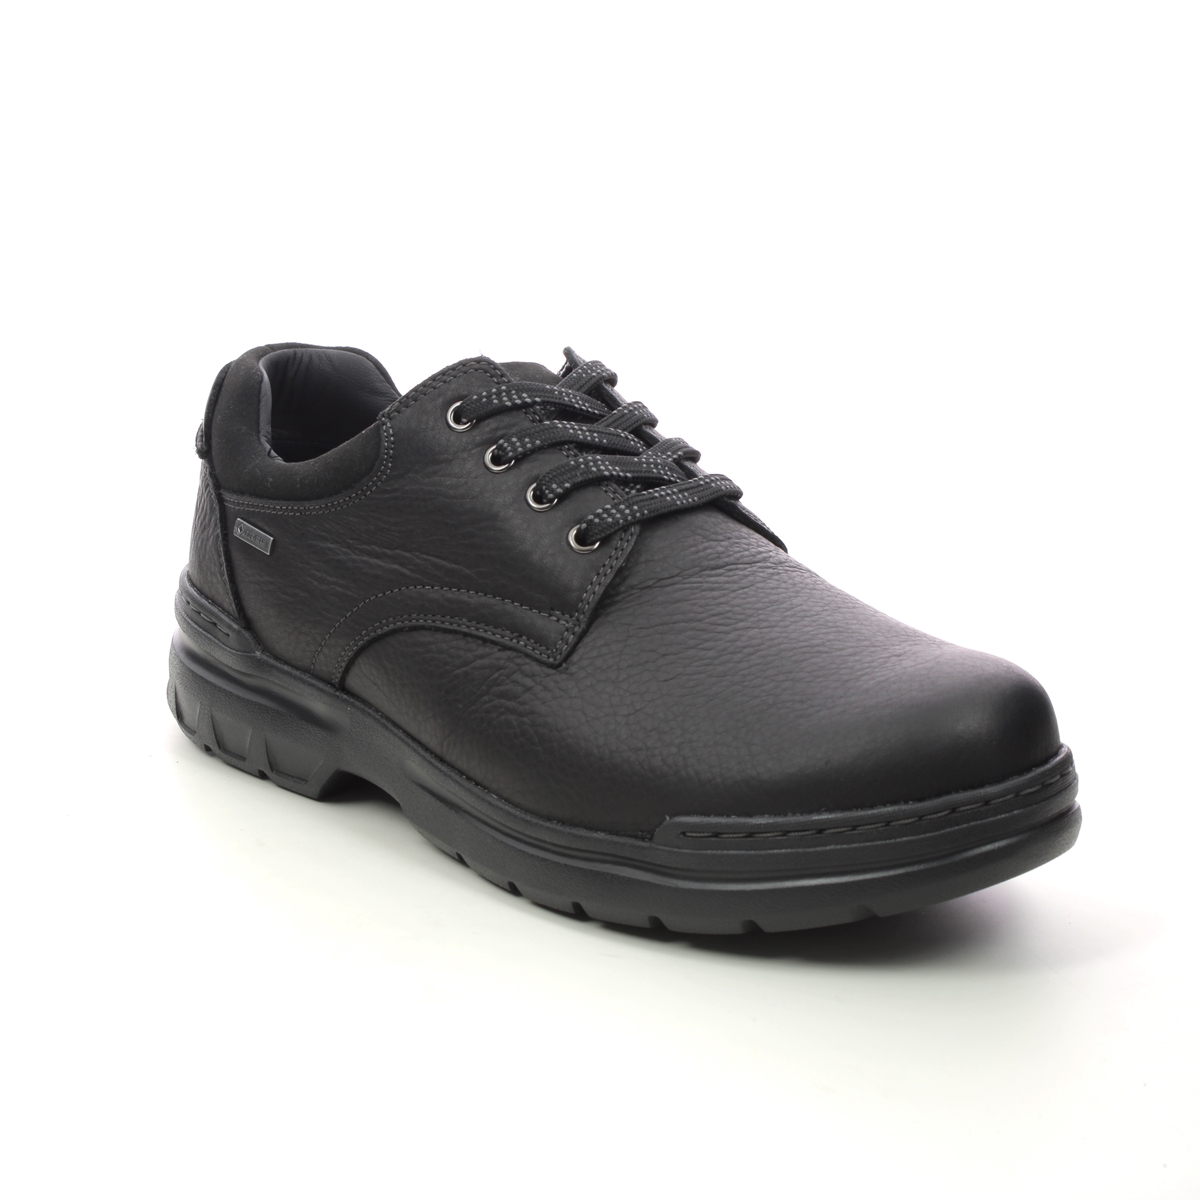 Clarks Rockie Walk Gtx Black Leather Mens Comfort Shoes 734648H In Size 9.5 In Plain Black Leather H Width Fitting Extra Wide